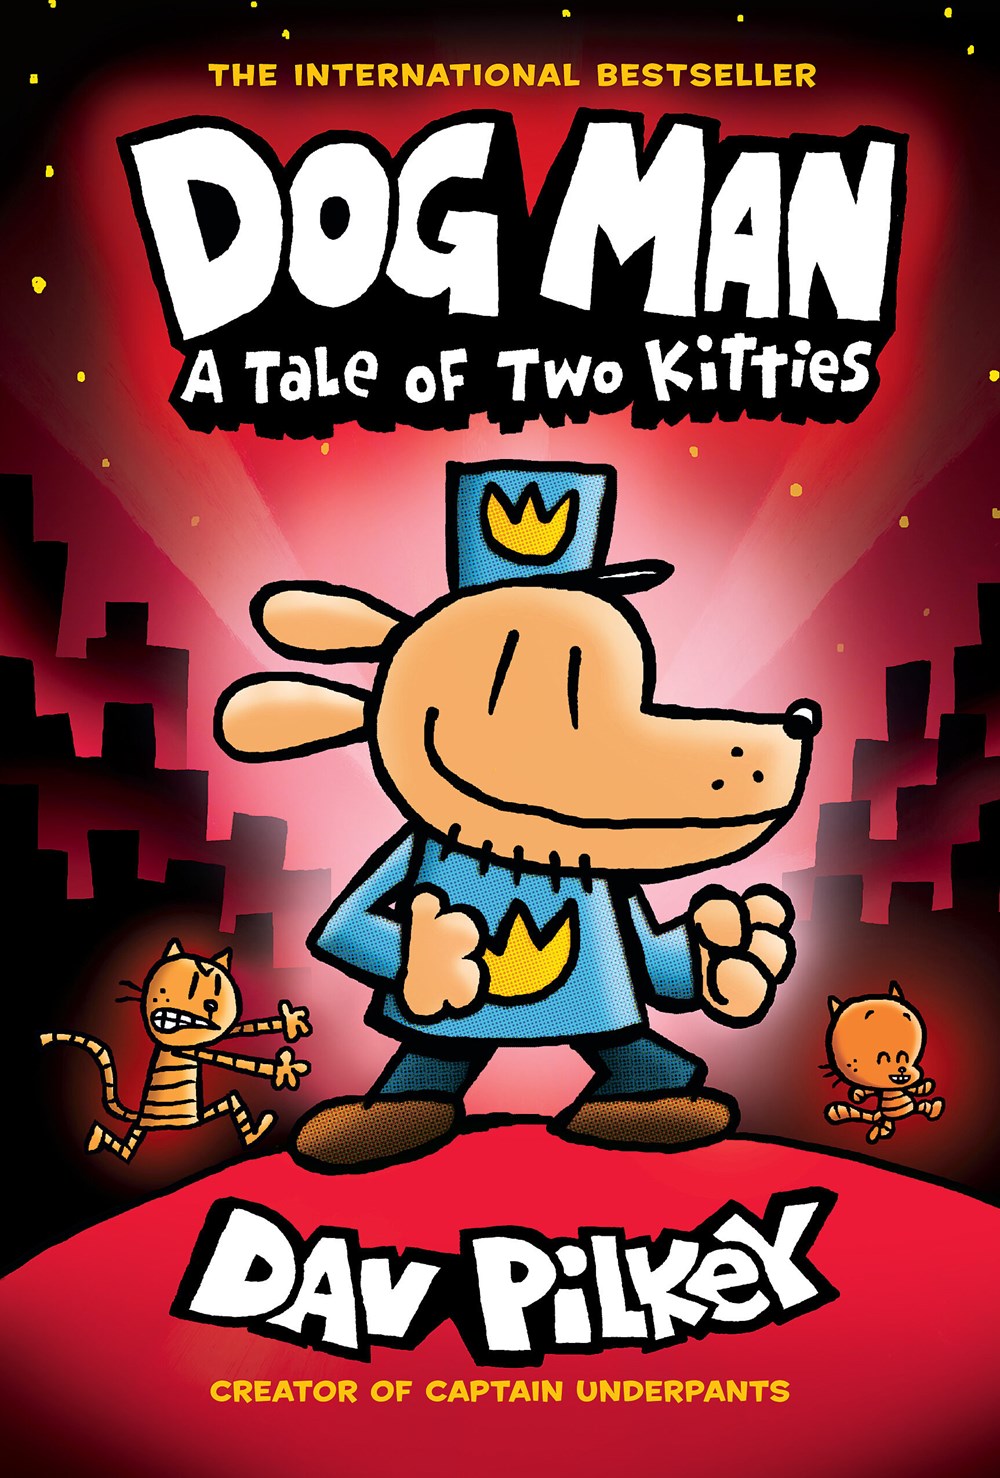 Dog Man: A Tale of Two Kitties: A Graphic Novel (Dog Man #3)